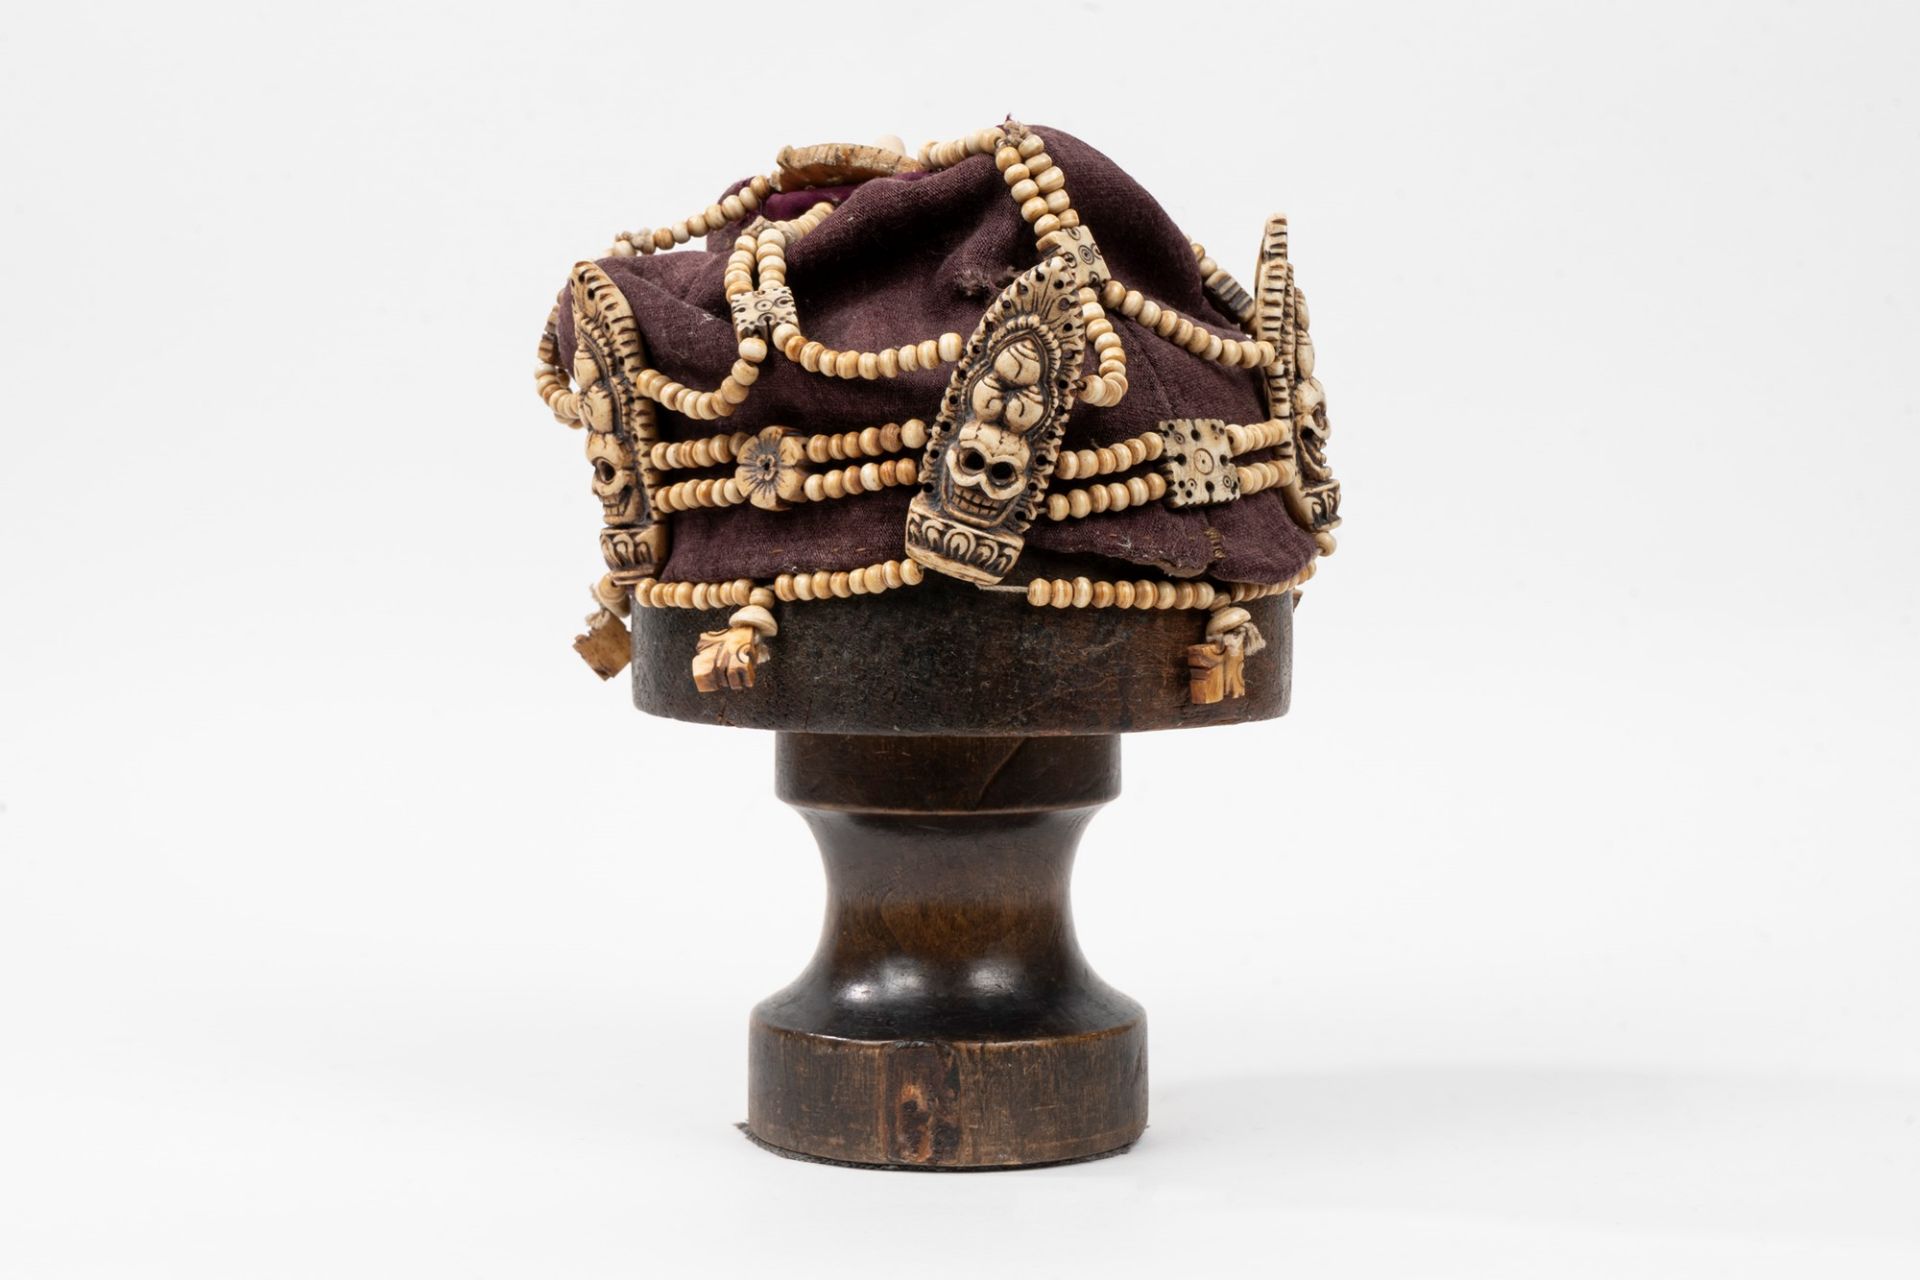 Fabric hat and bone decorations, Tibet, late 19th century - early 20th century